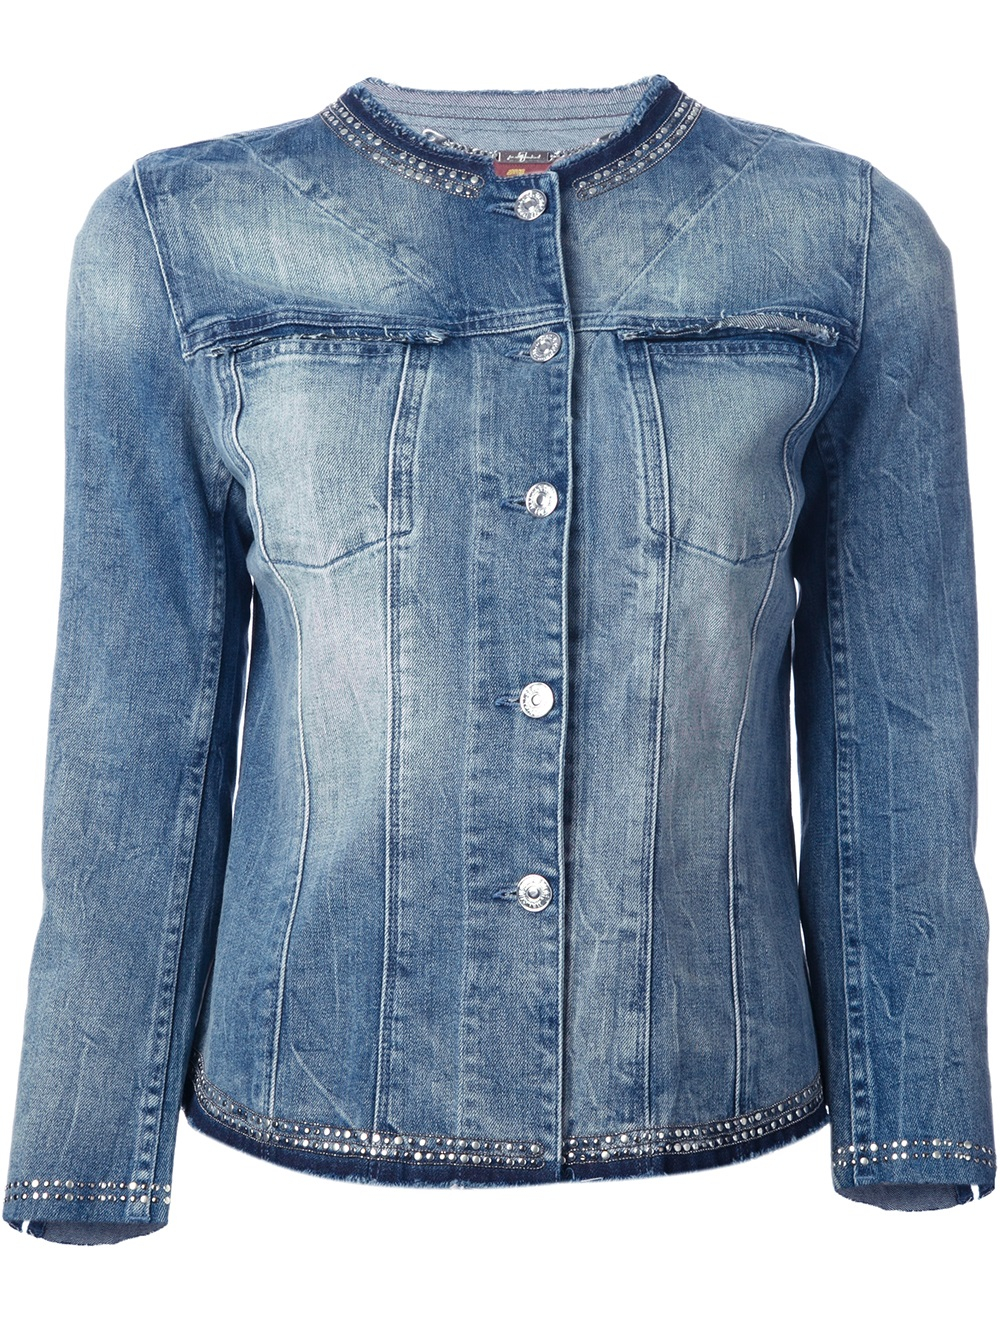 Lyst - 7 For All Mankind Studded Collarless Denim Jacket in Blue